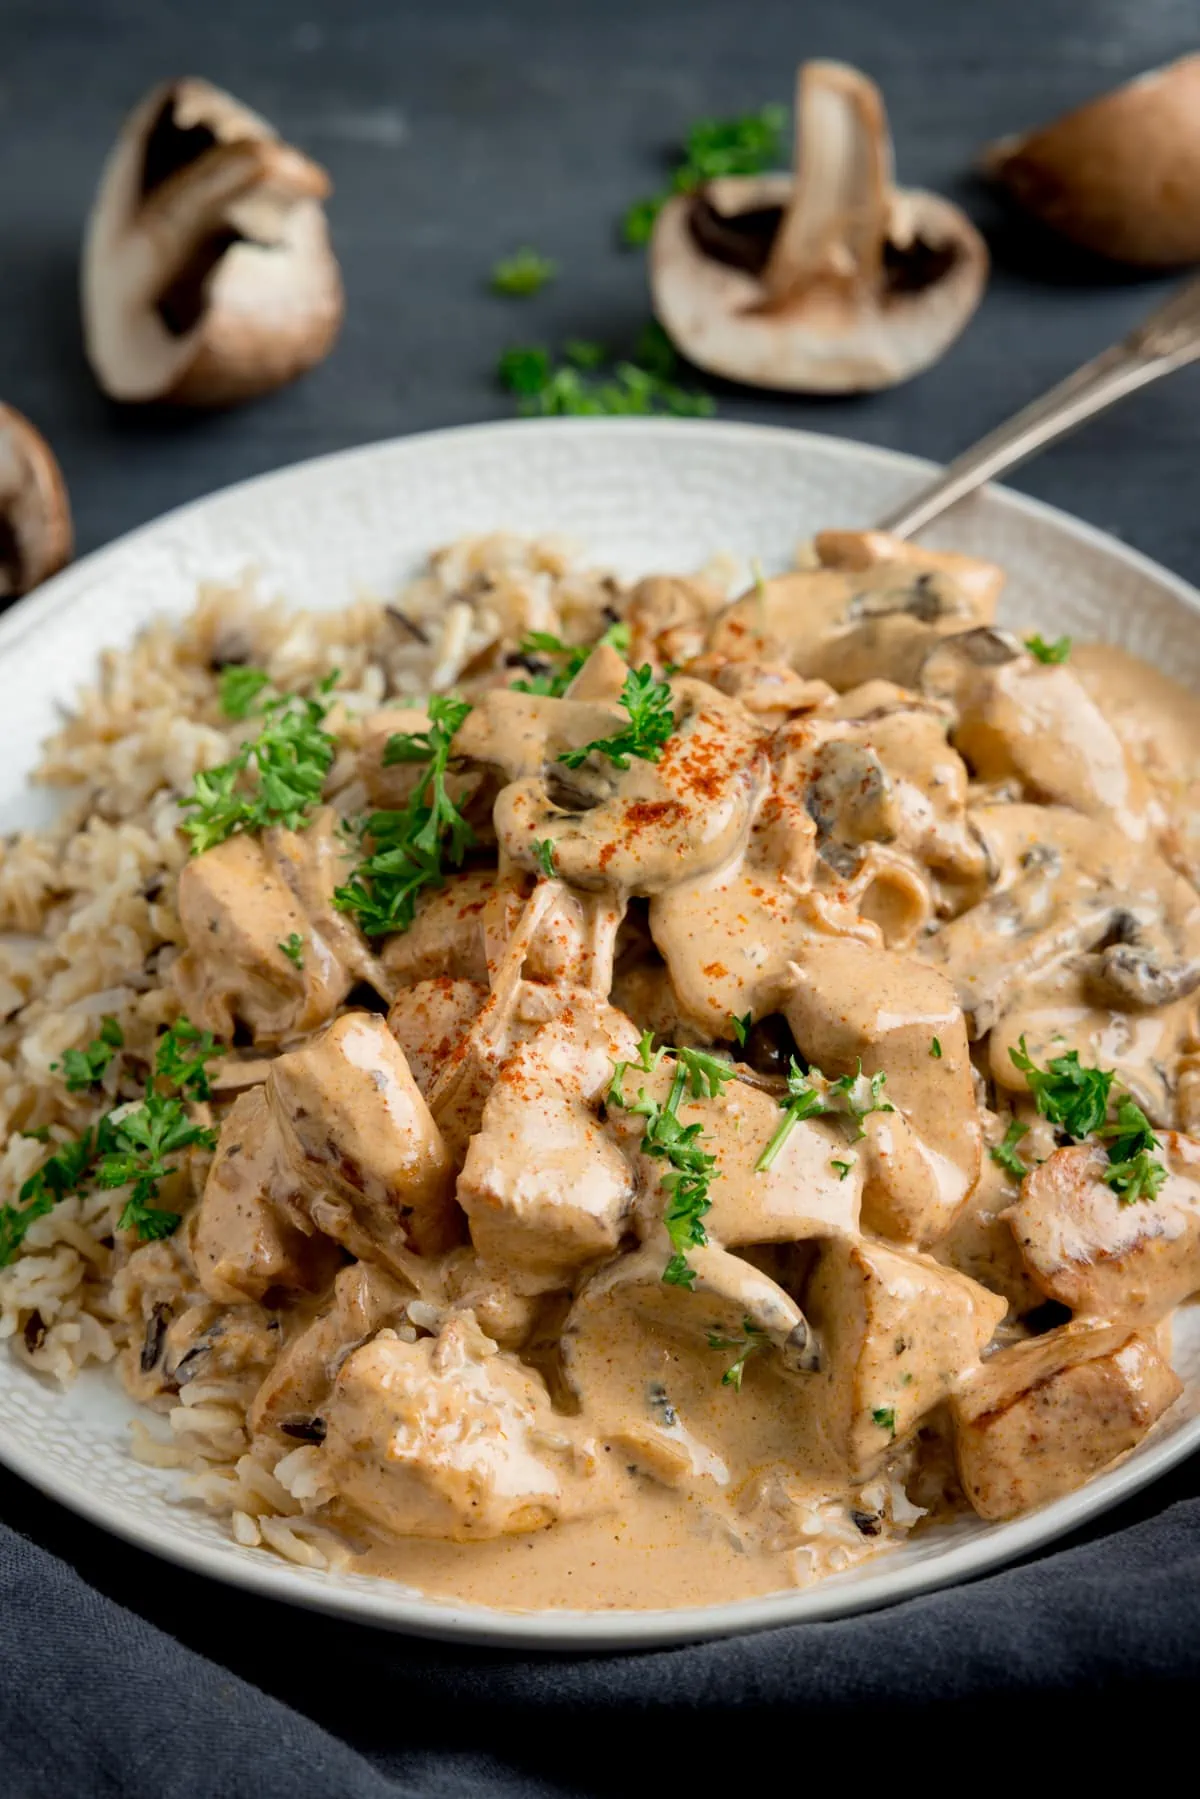 Side-on image of chicken stroganoff and rice on a white plate with a metal fork. The plate is on a dark surface and there are sliced mushrooms and chopped parsley scattered around.